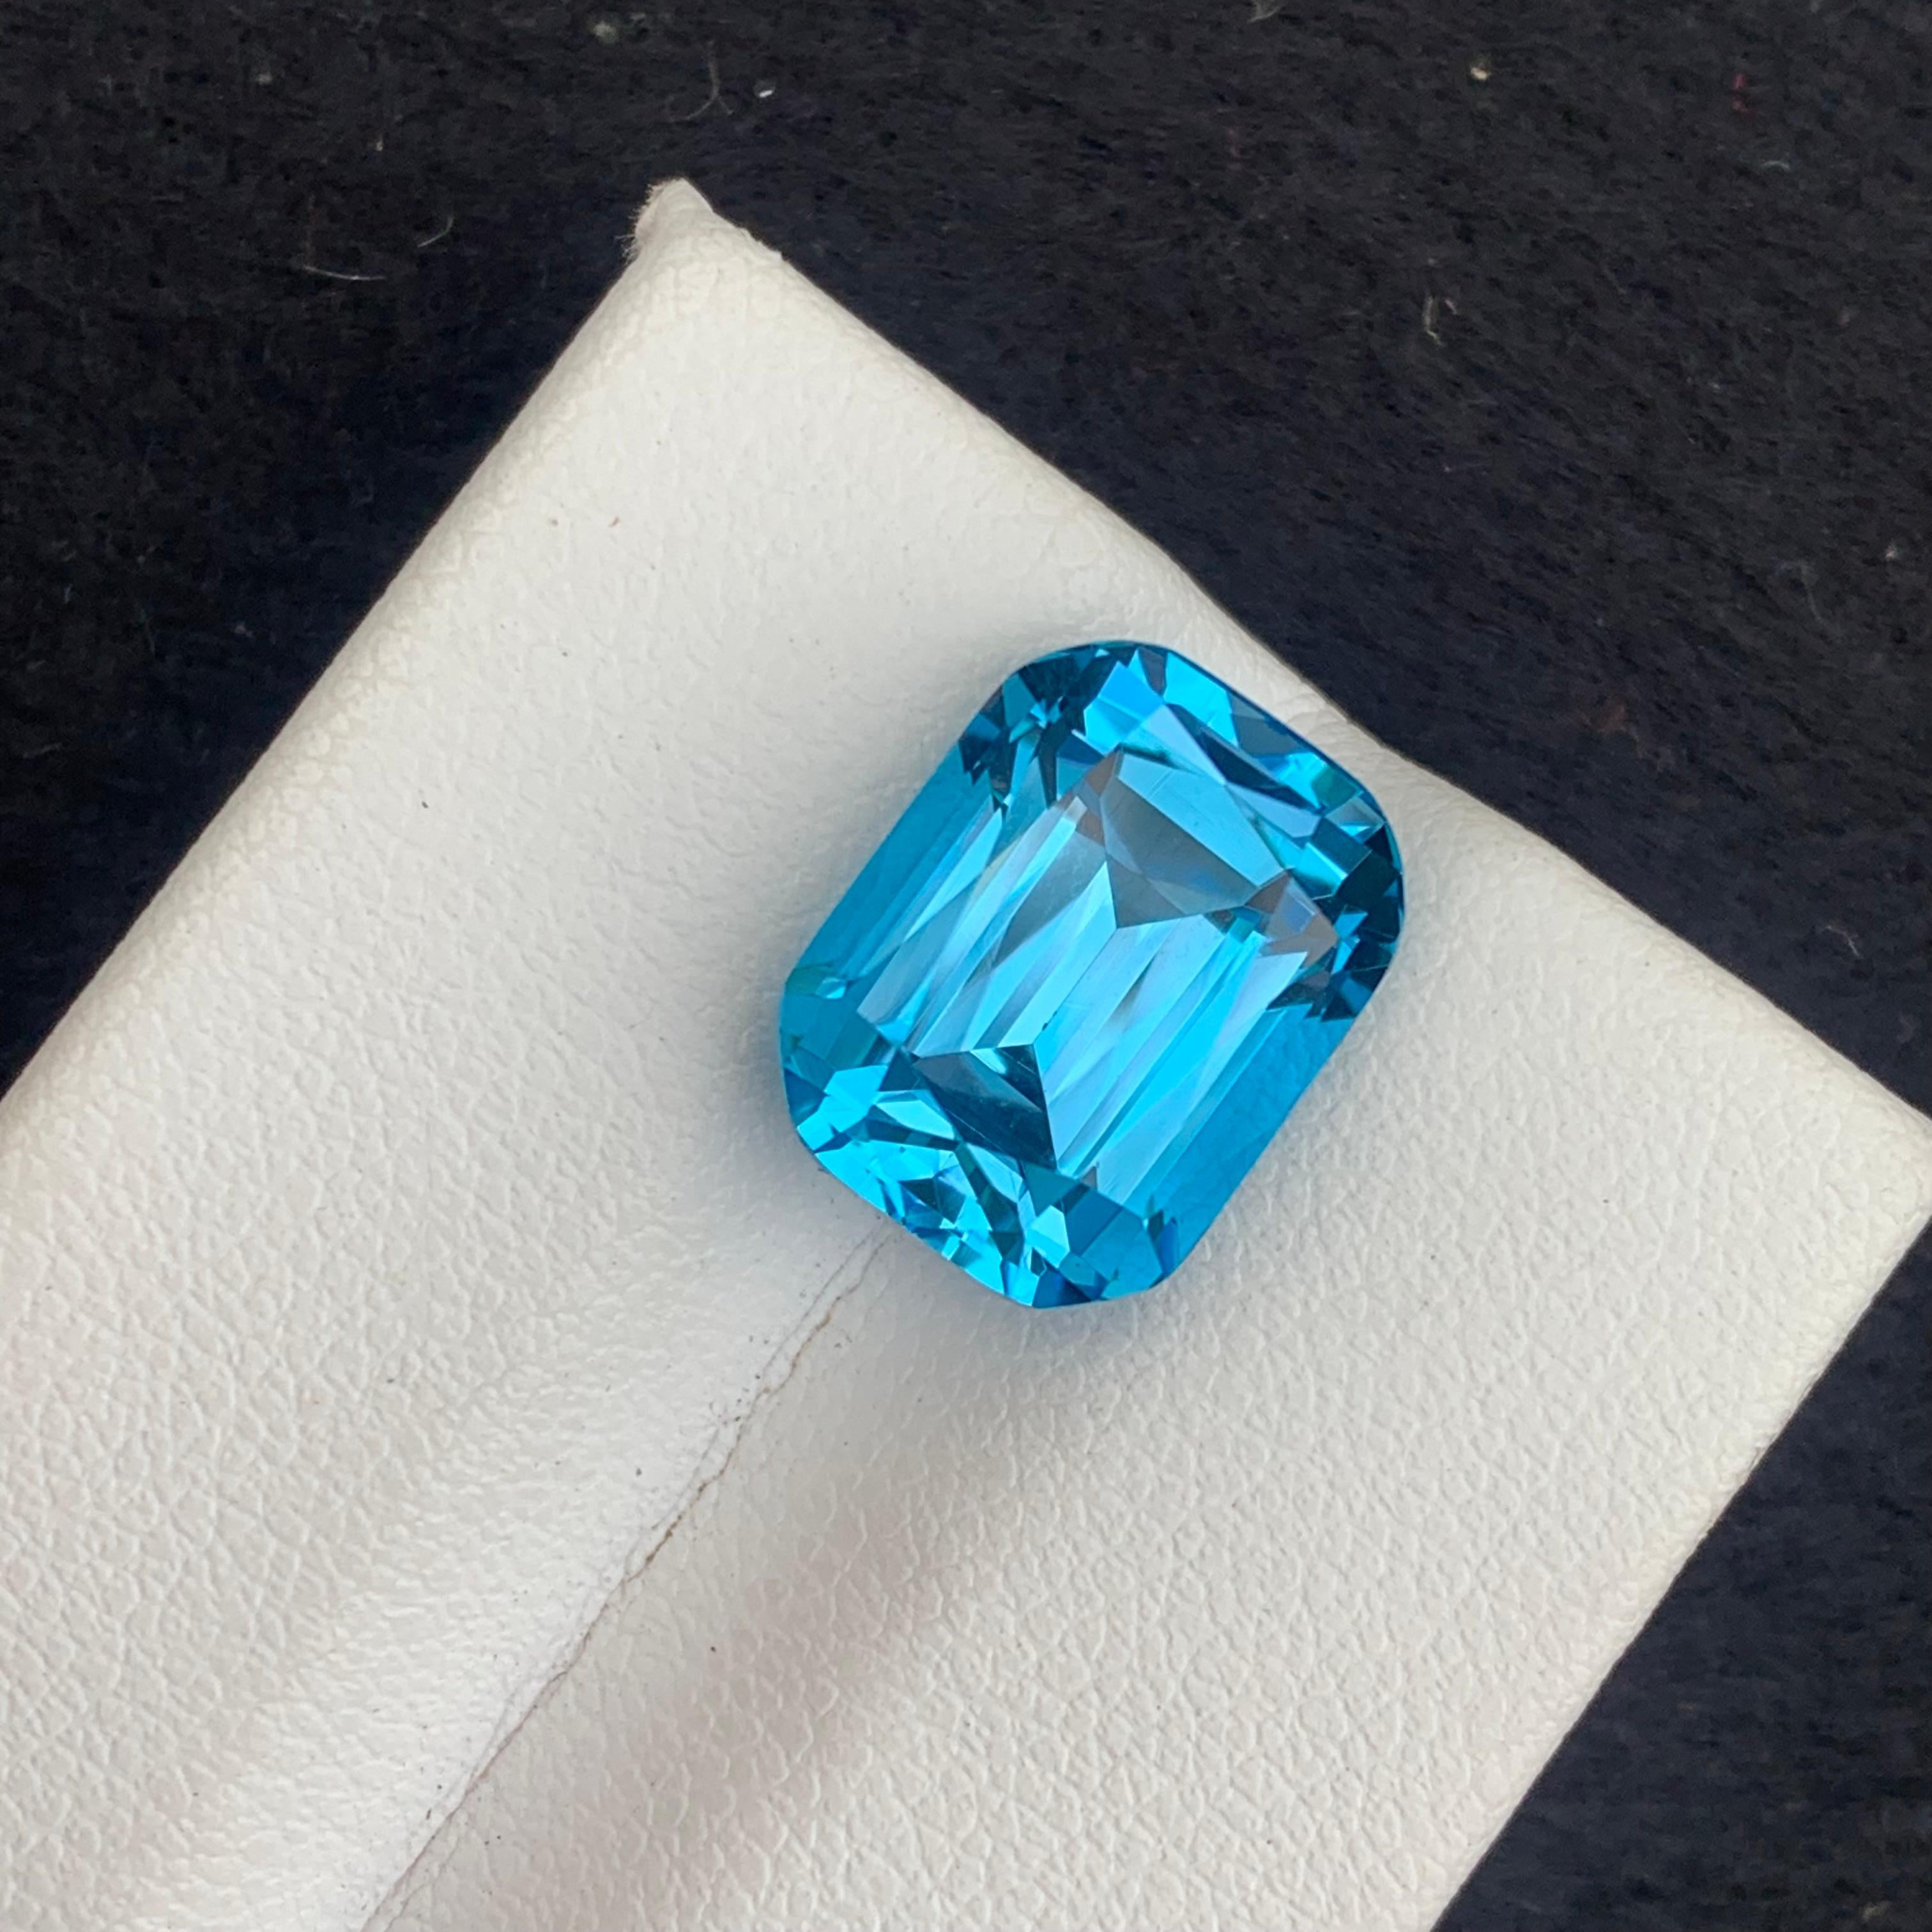 Faceted Electric Blue Topaz
Weight: 10.20 Carats
Dimension: 12.7x9.7x8.6 Mm
Origin: Brazil
Color: Blue
Shape: Long Cushion
Certificate: On Demand